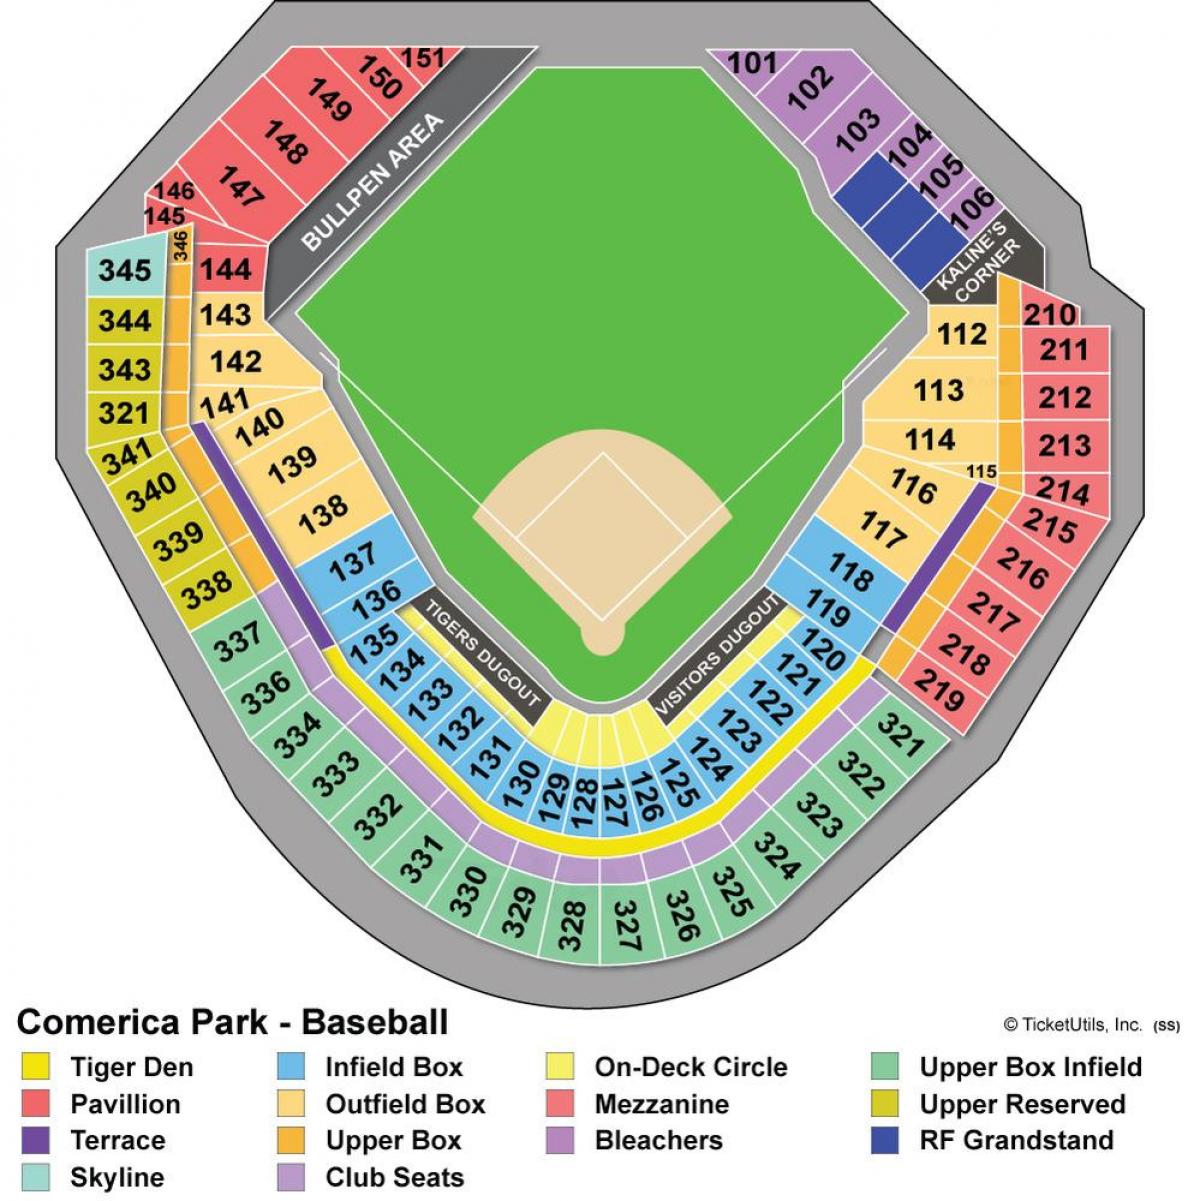 map of comerica park